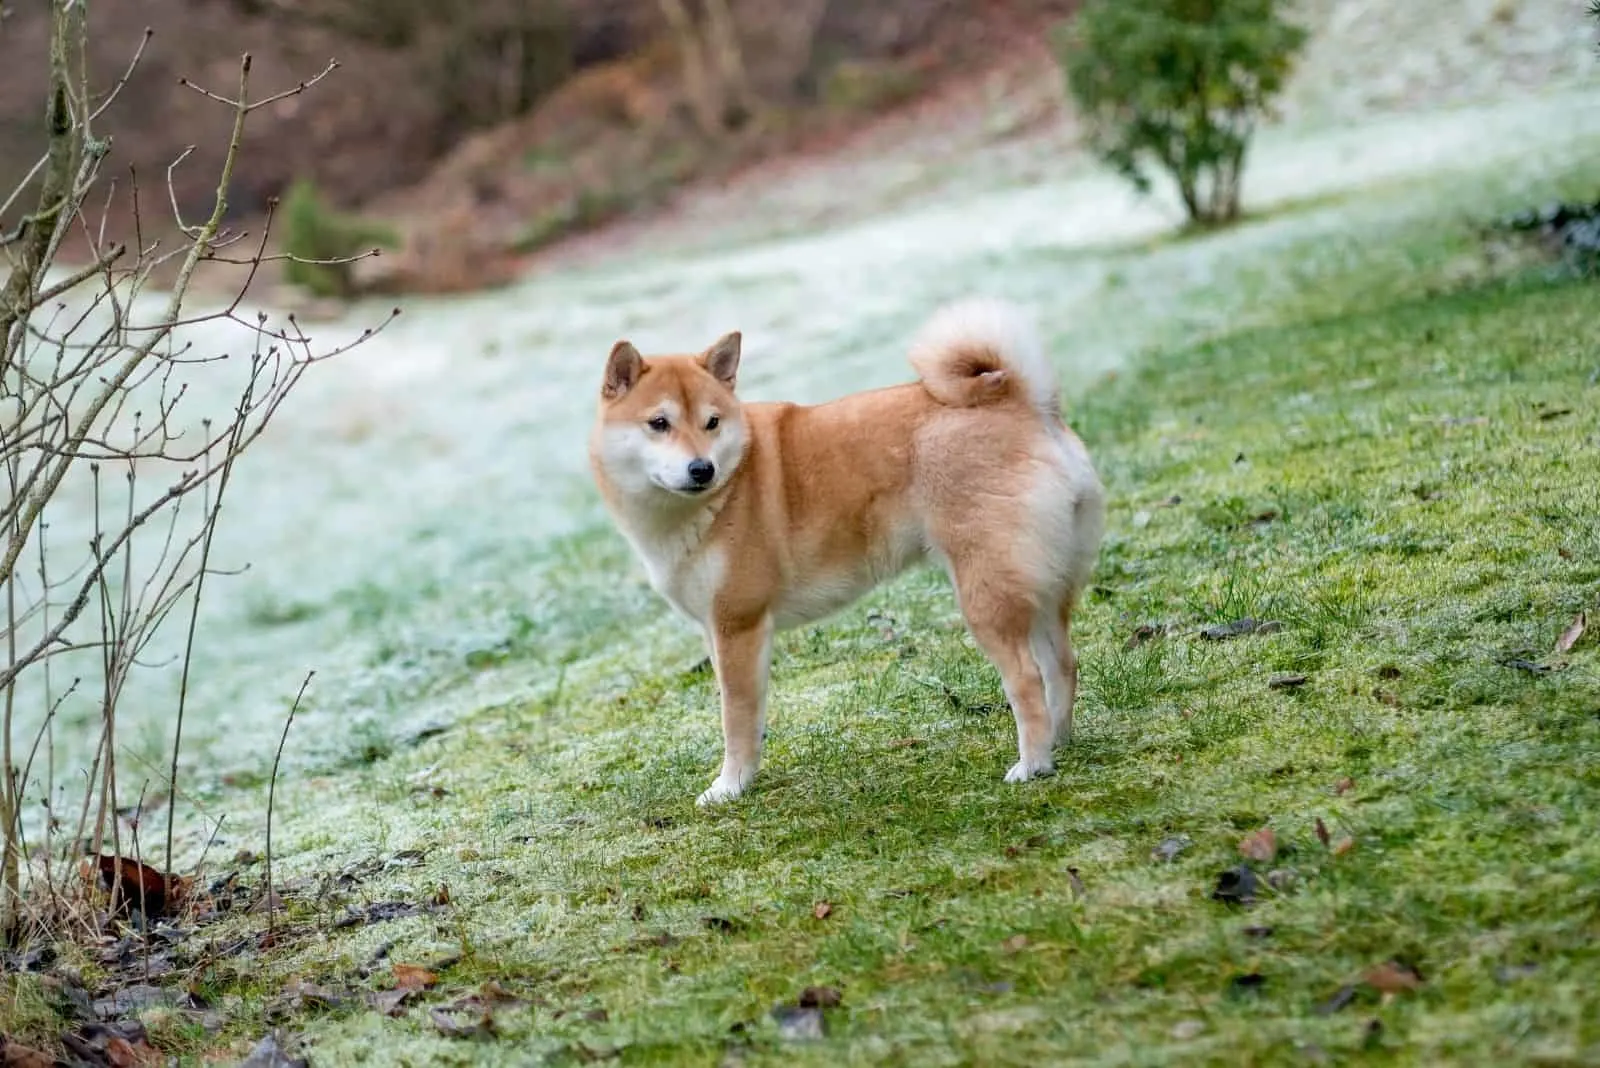 image of a shiba inu dog standing near the waters